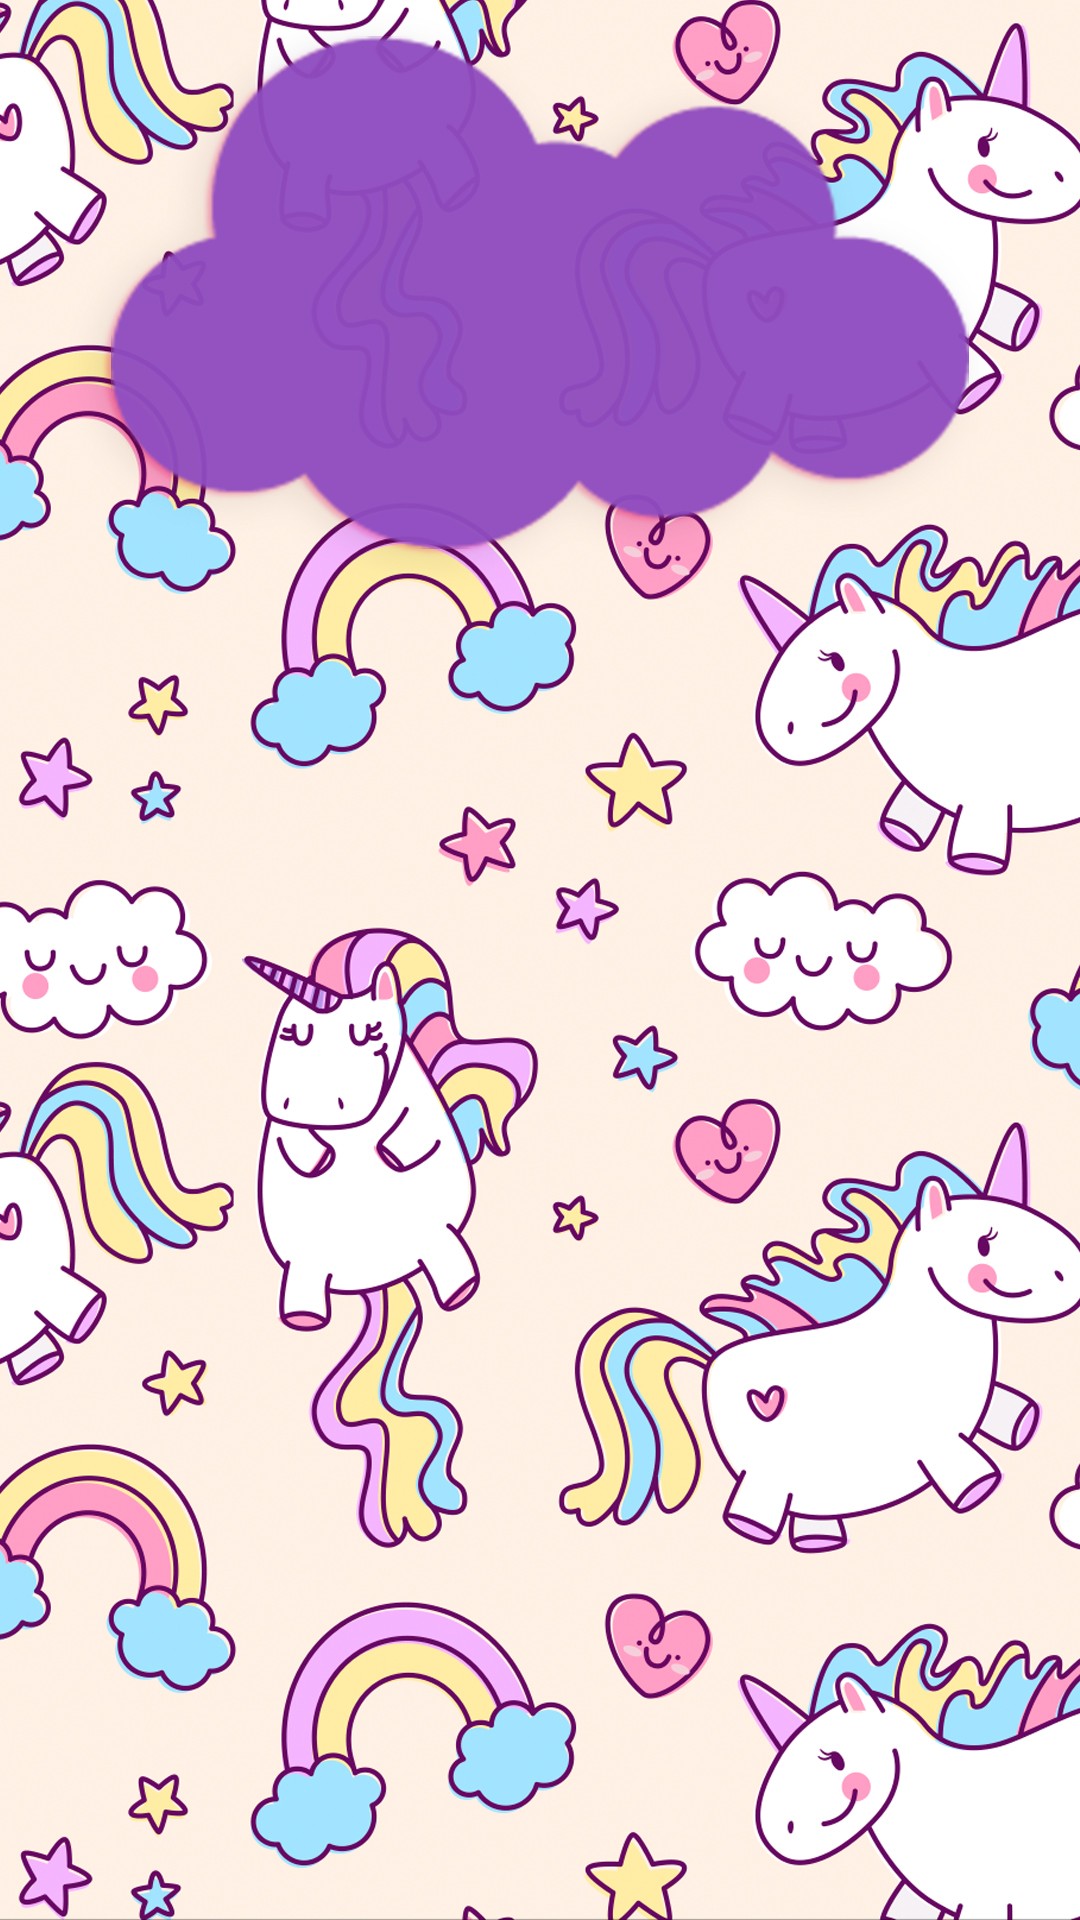 Cute Girly Unicorn iPhone Wallpaper Lock Screen With high-resolution 1080X1920 pixel. You can set as wallpaper for Apple iPhone X, XS Max, XR, 8, 7, 6, SE, iPad. Enjoy and share your favorite HD wallpapers and background images